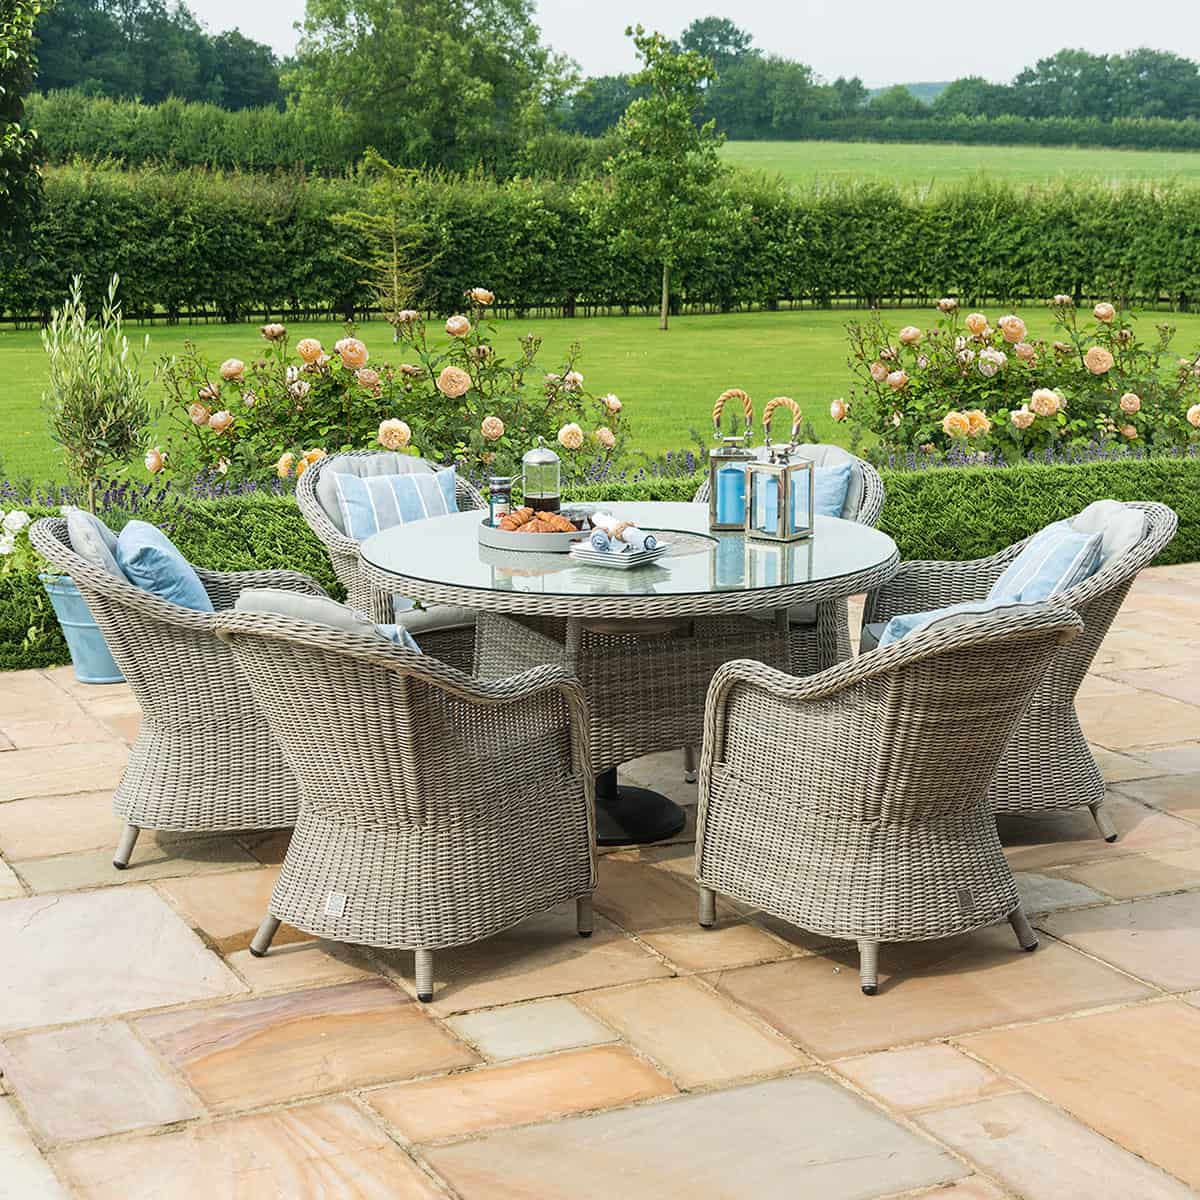 Light grey rattan 6 seat round ice bucket dining set with heritage chairs